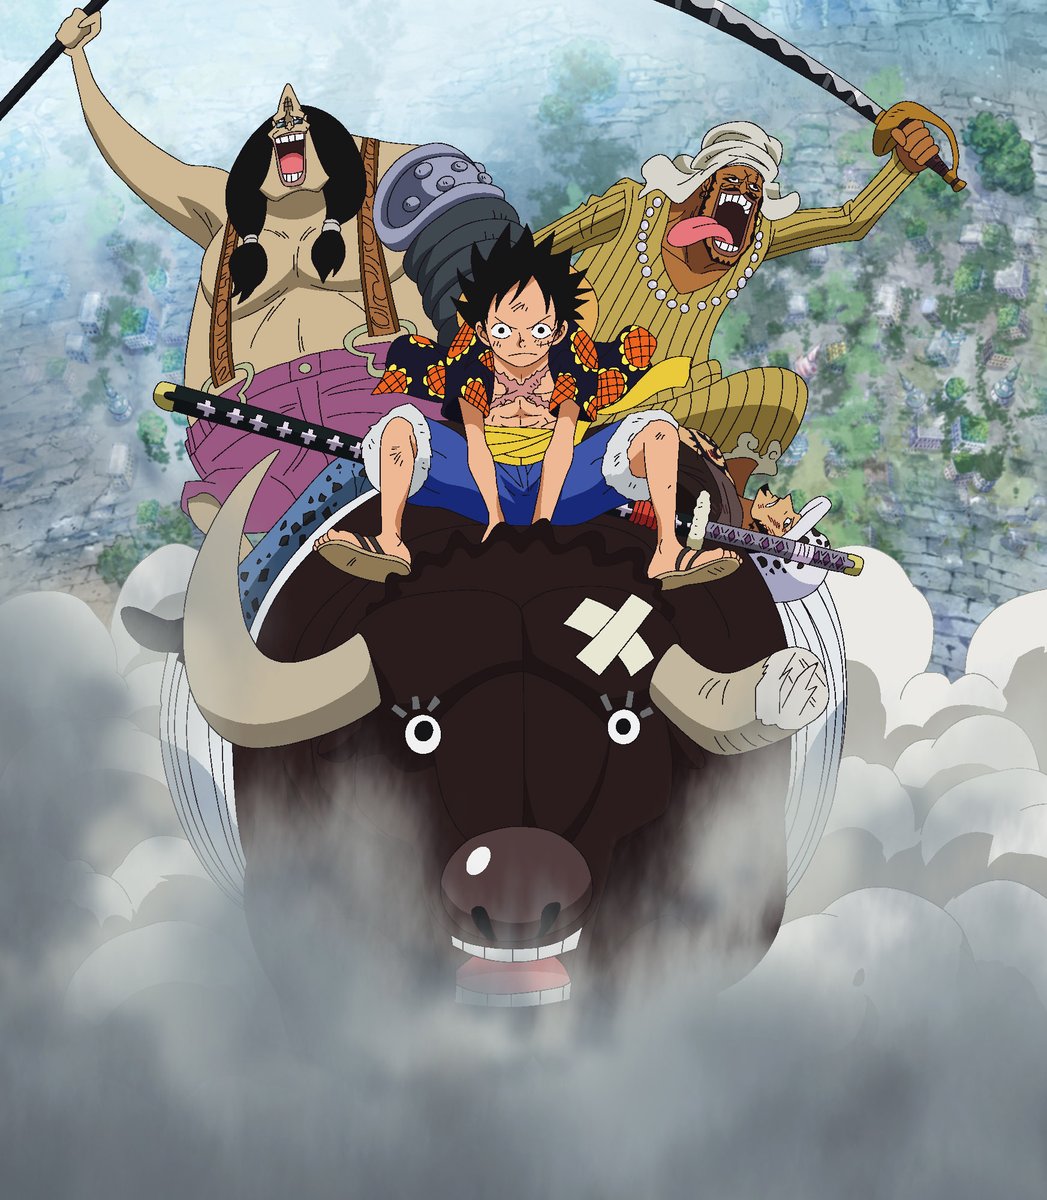 Toei Animation S Tweet The Straw Hats Adventure In Dressrosa Heats Up New Dub Episodes Of One Piece Season 11 Voyage 5 Have Started Its Rollout On Digital Download Microsoft